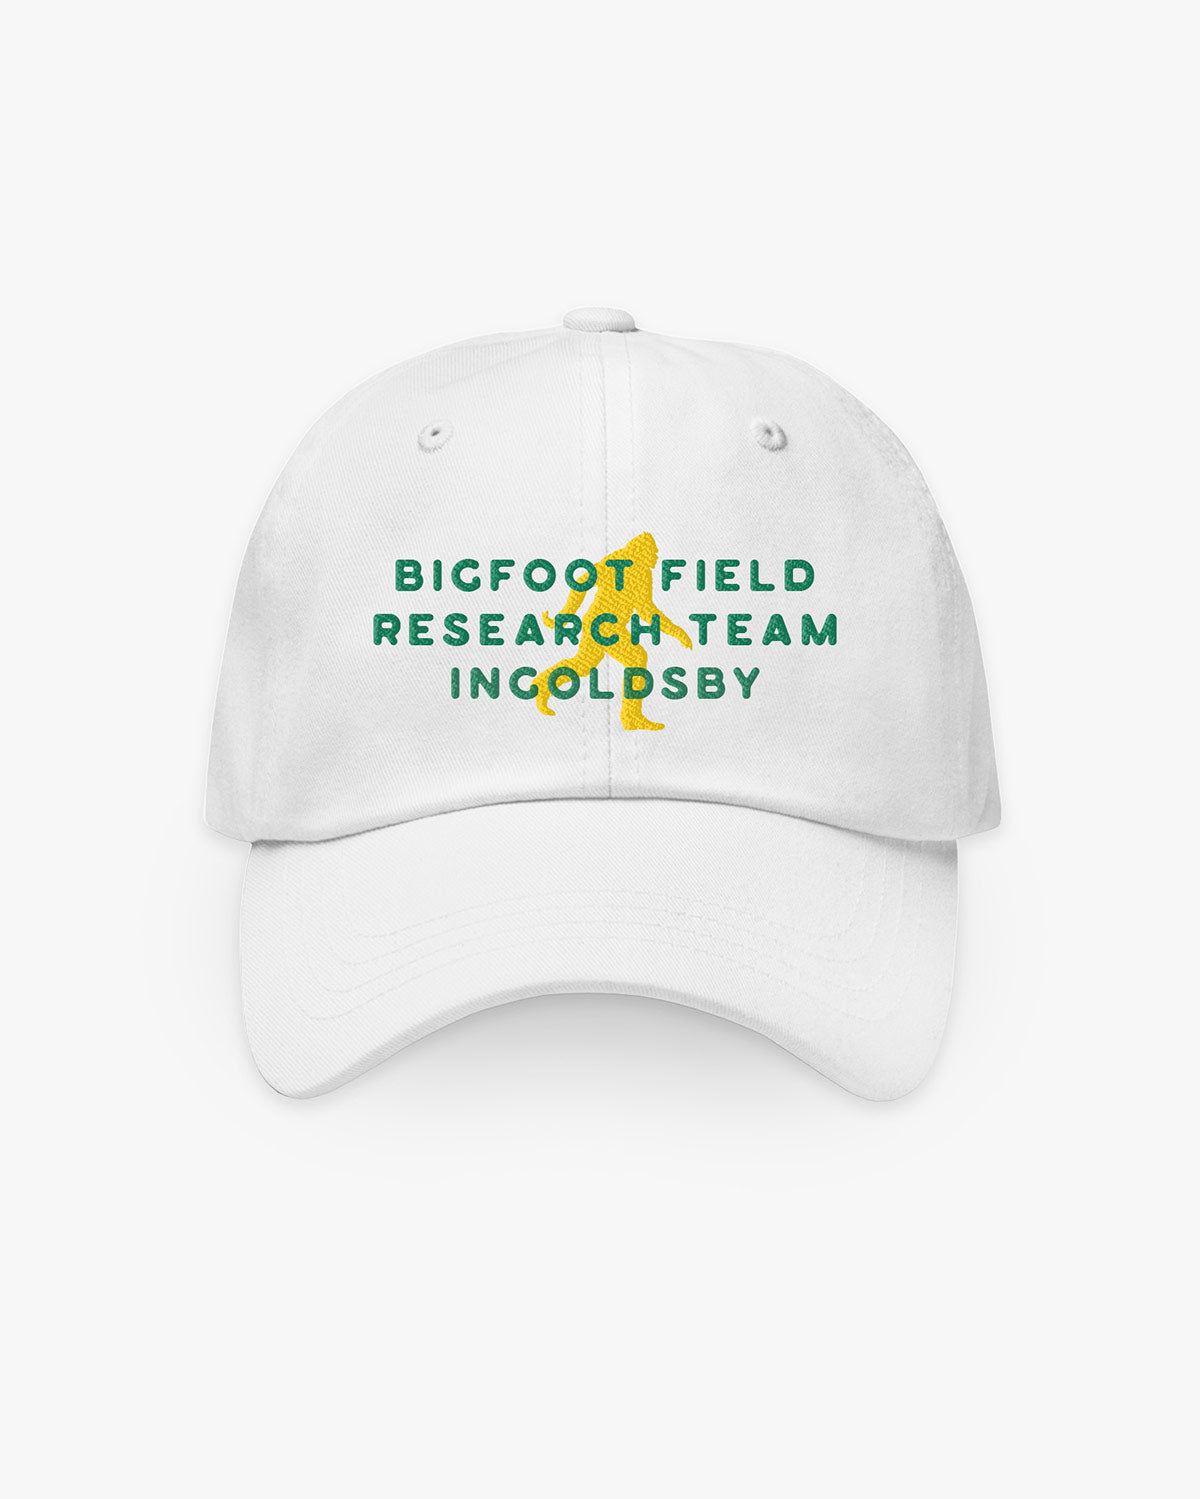 Bigfoot Research Team - Ingoldsby - Hat